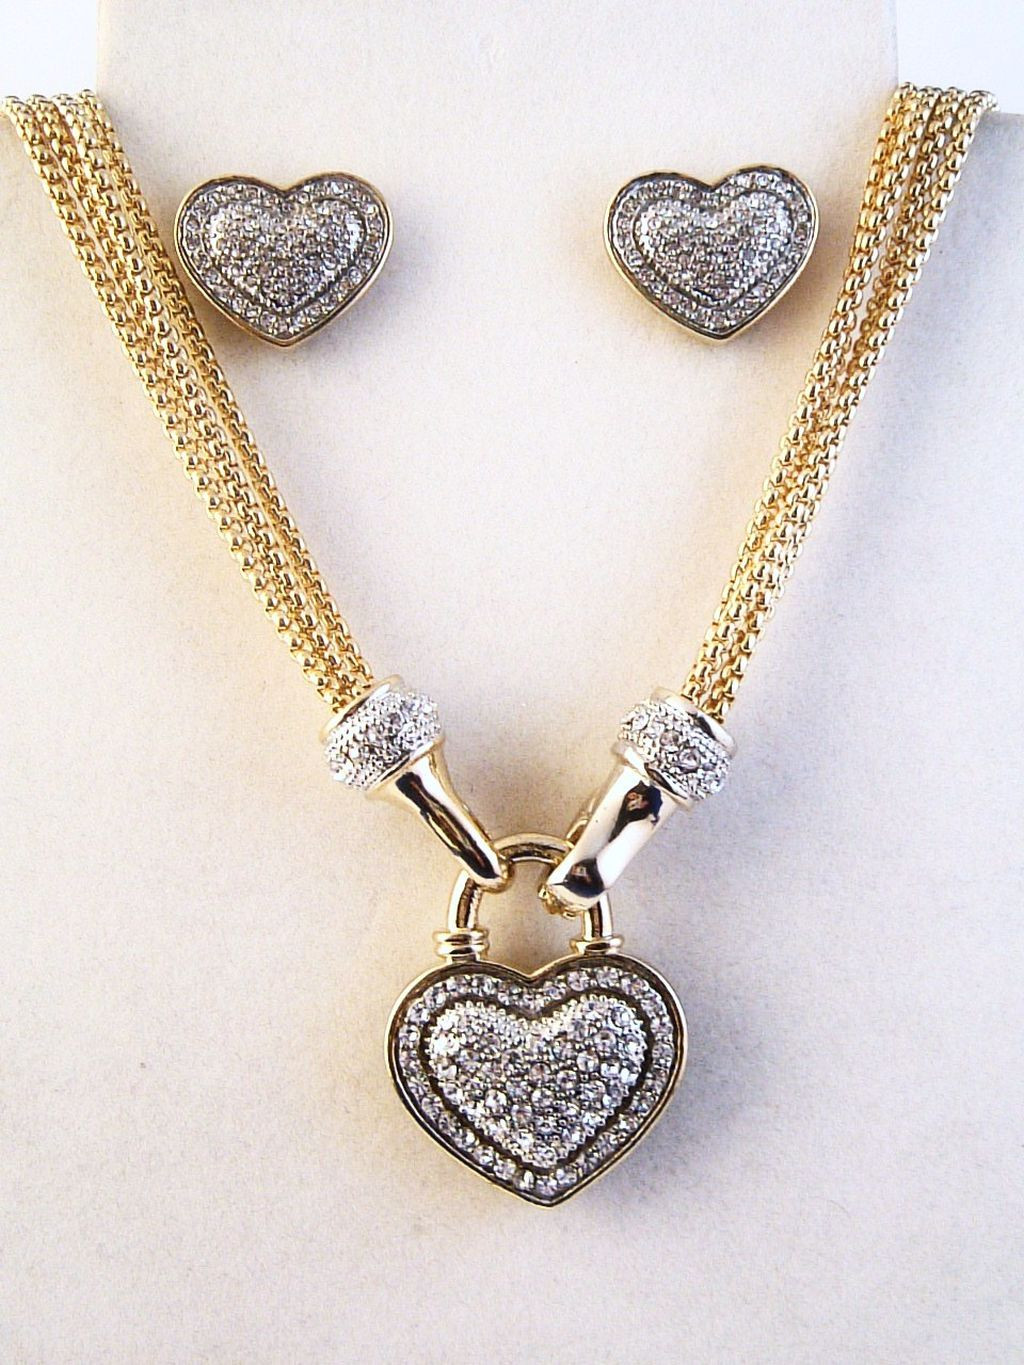 Diamond Earrings And Necklace Sets
 Designer s Touch Diamond Heart Pendant Necklace Earrings